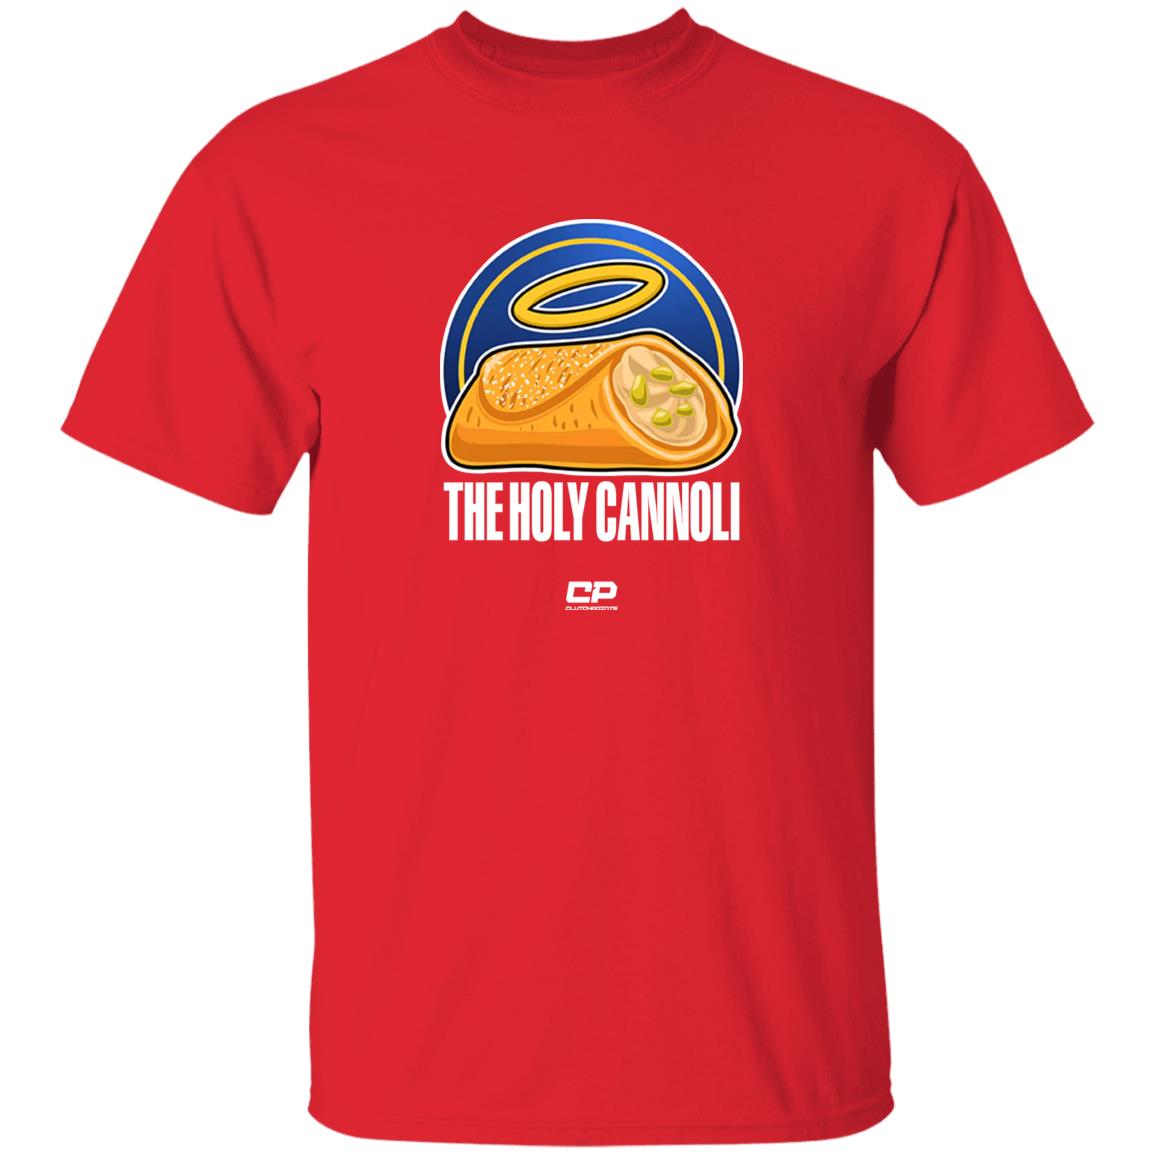 The Holy Cannoli Shirt Clutchpoints Clutchauthority Store